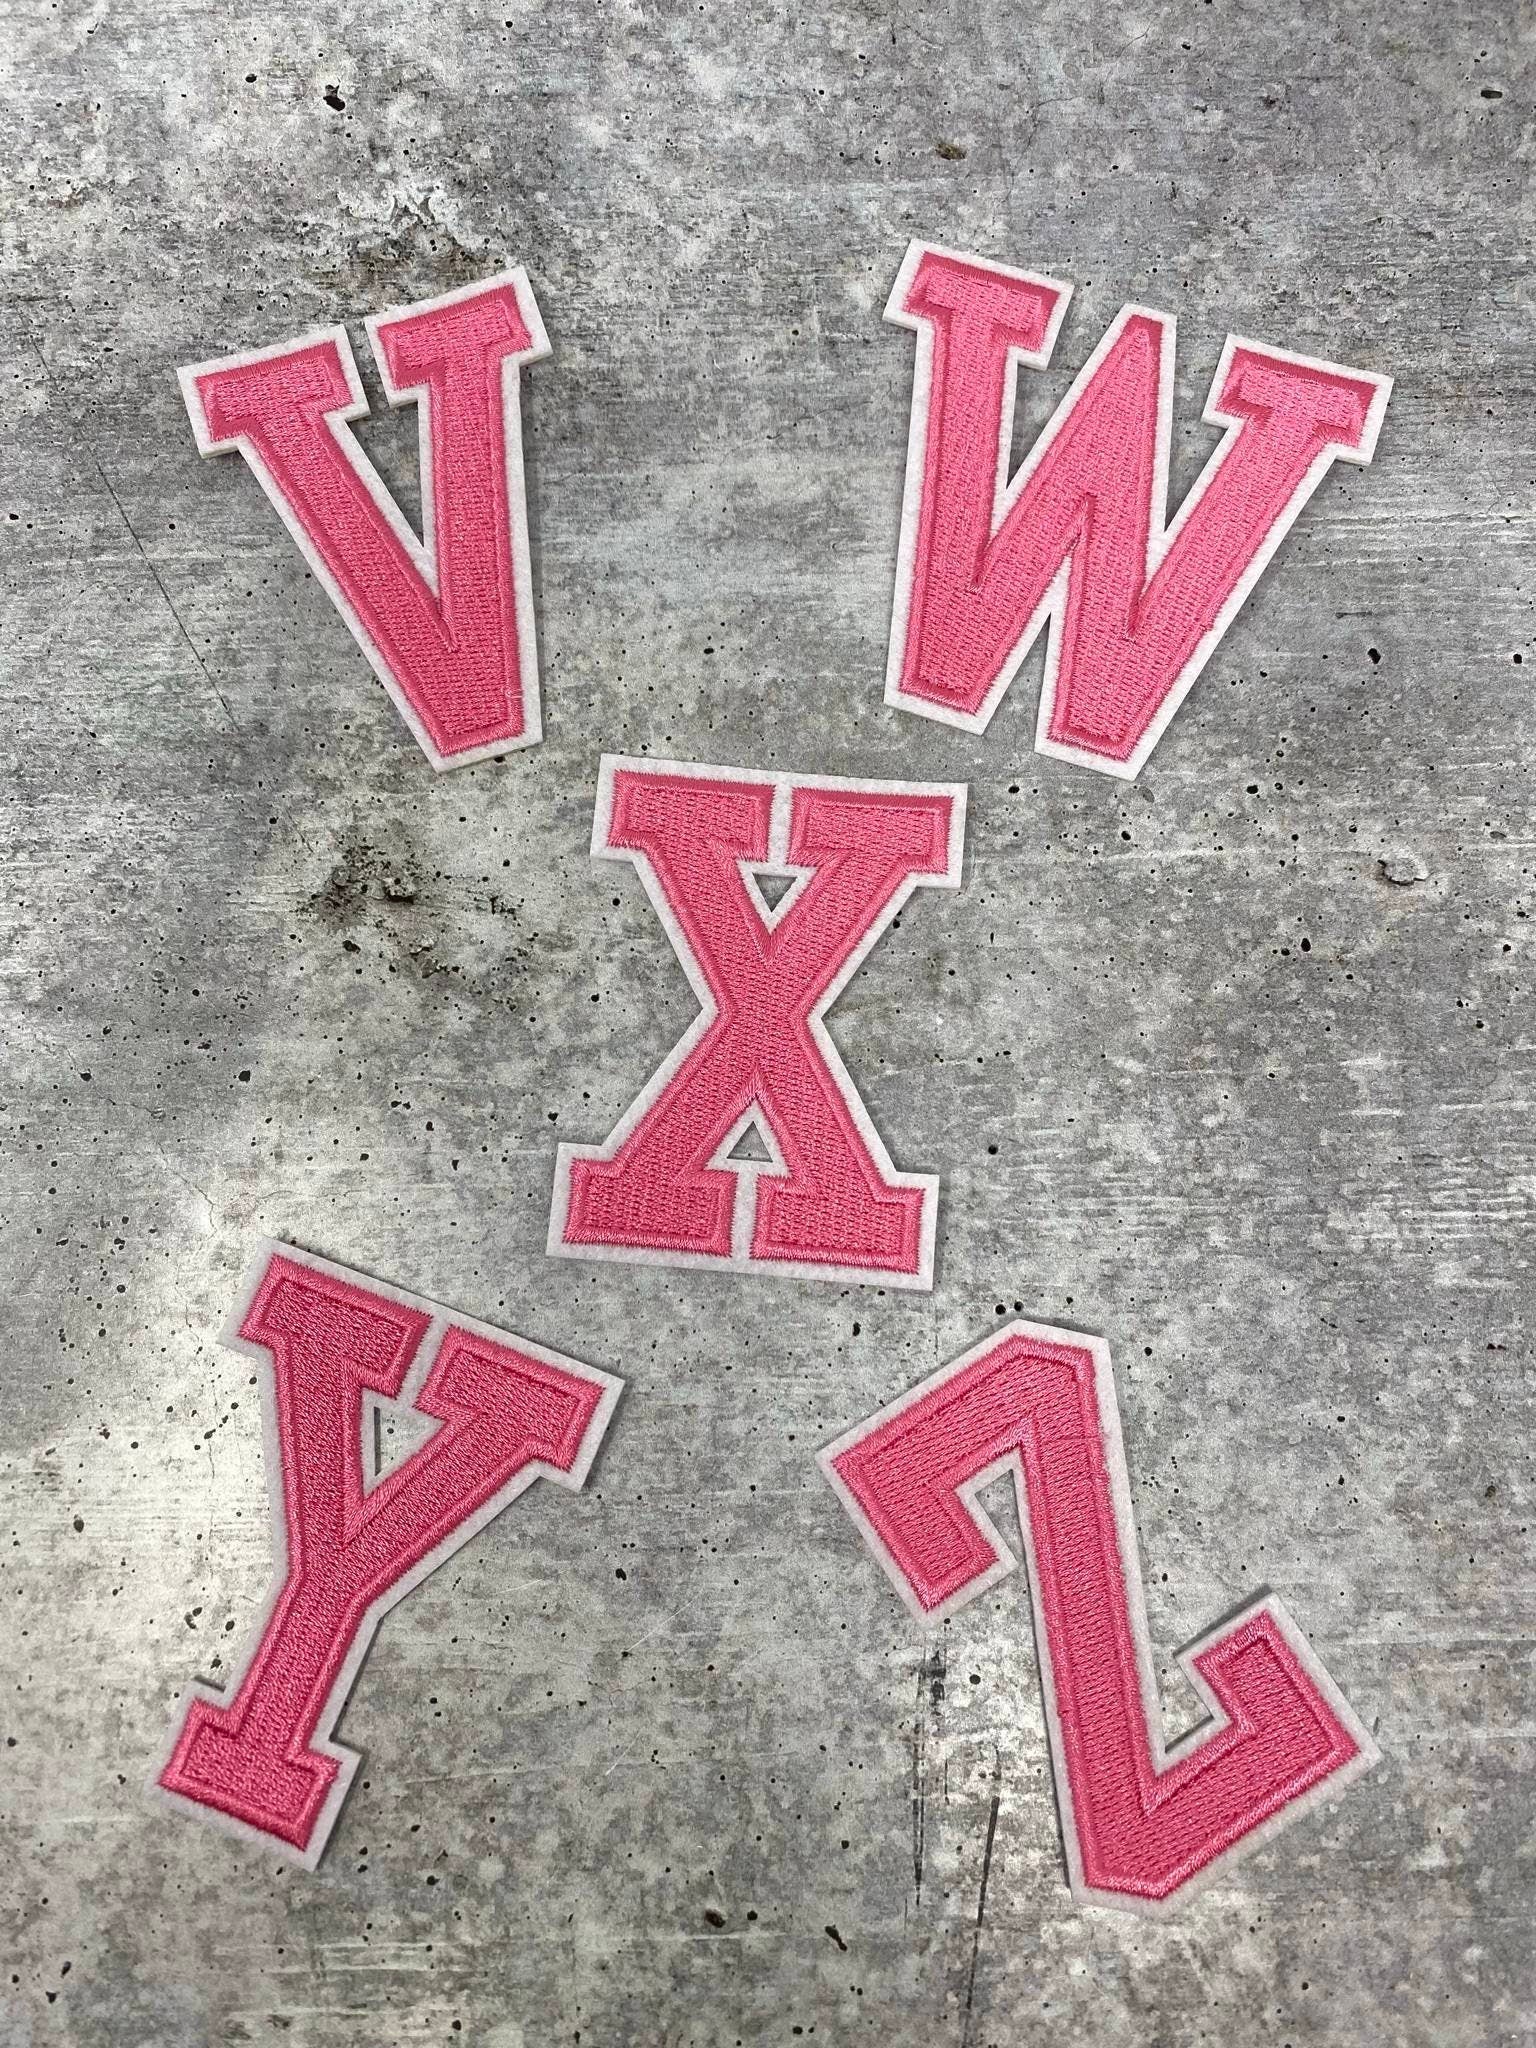 New, "PINK" 3" Embroidered Letter w/ White Felt, Varsity Letter Patch, 1-pc, Iron-on Backing, Choose Your Letter, A-Z Letters, DIY Letters,